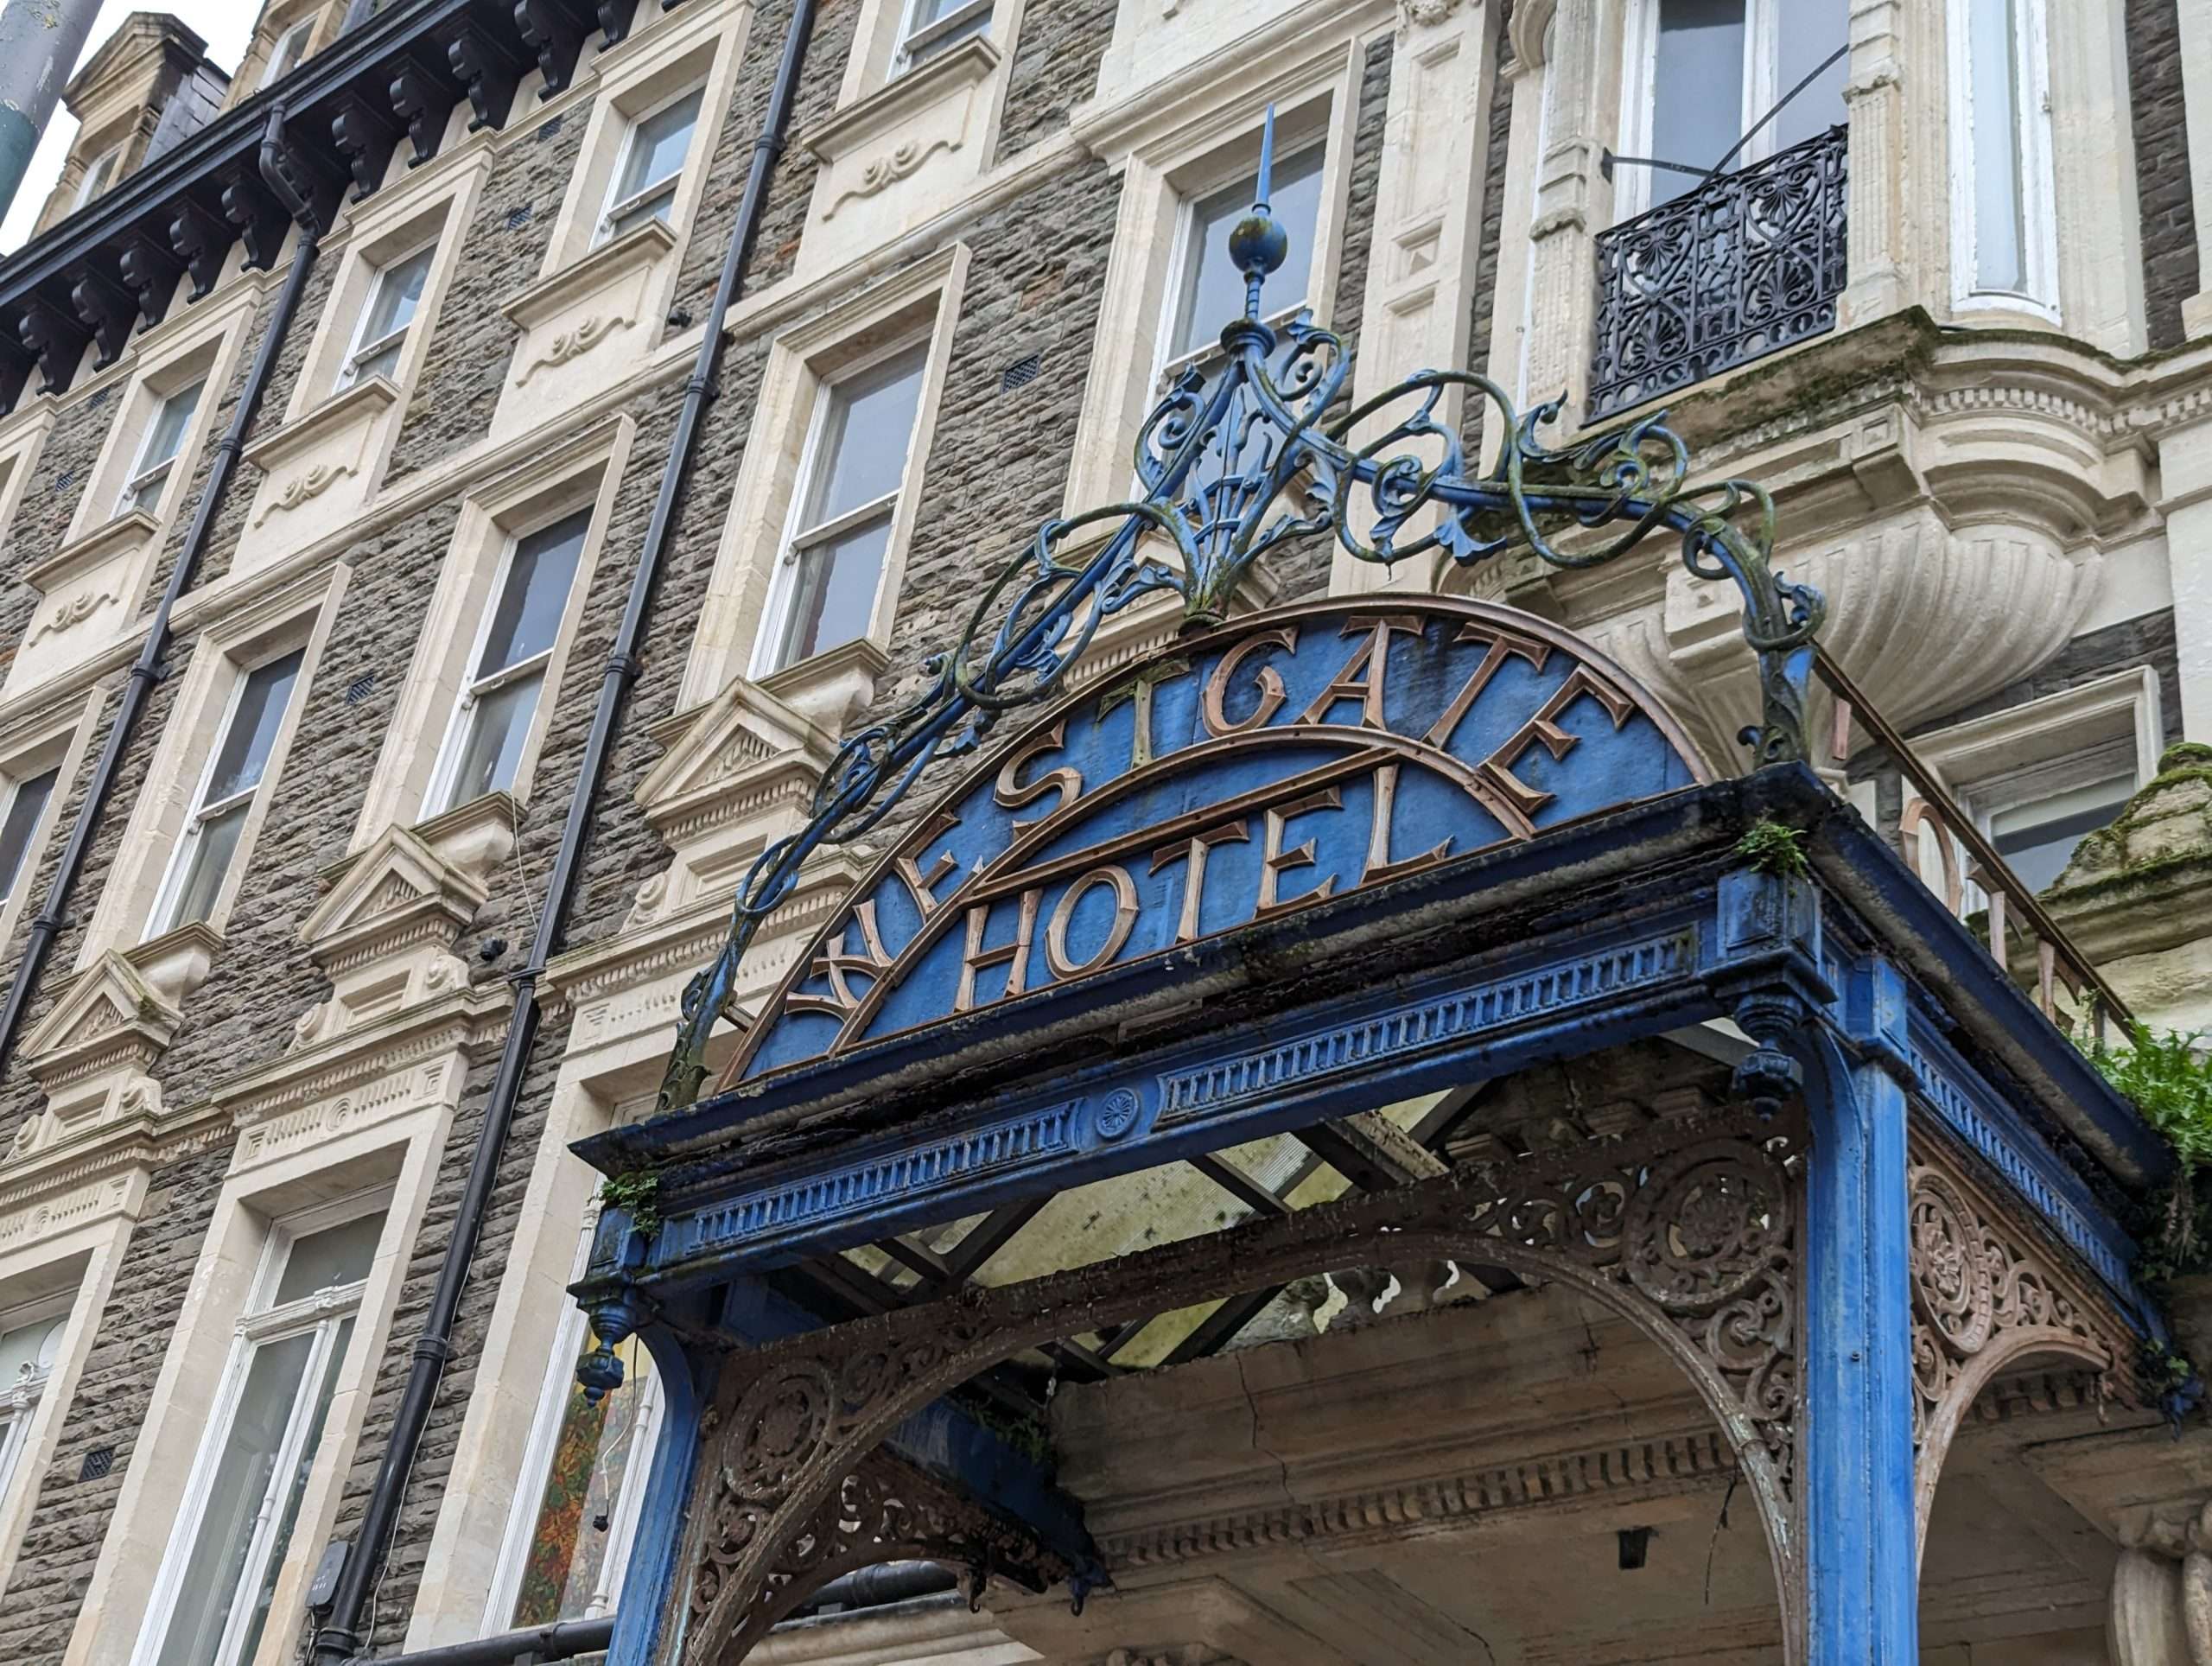 Break-ins and water damage plague historic Westgate Hotel